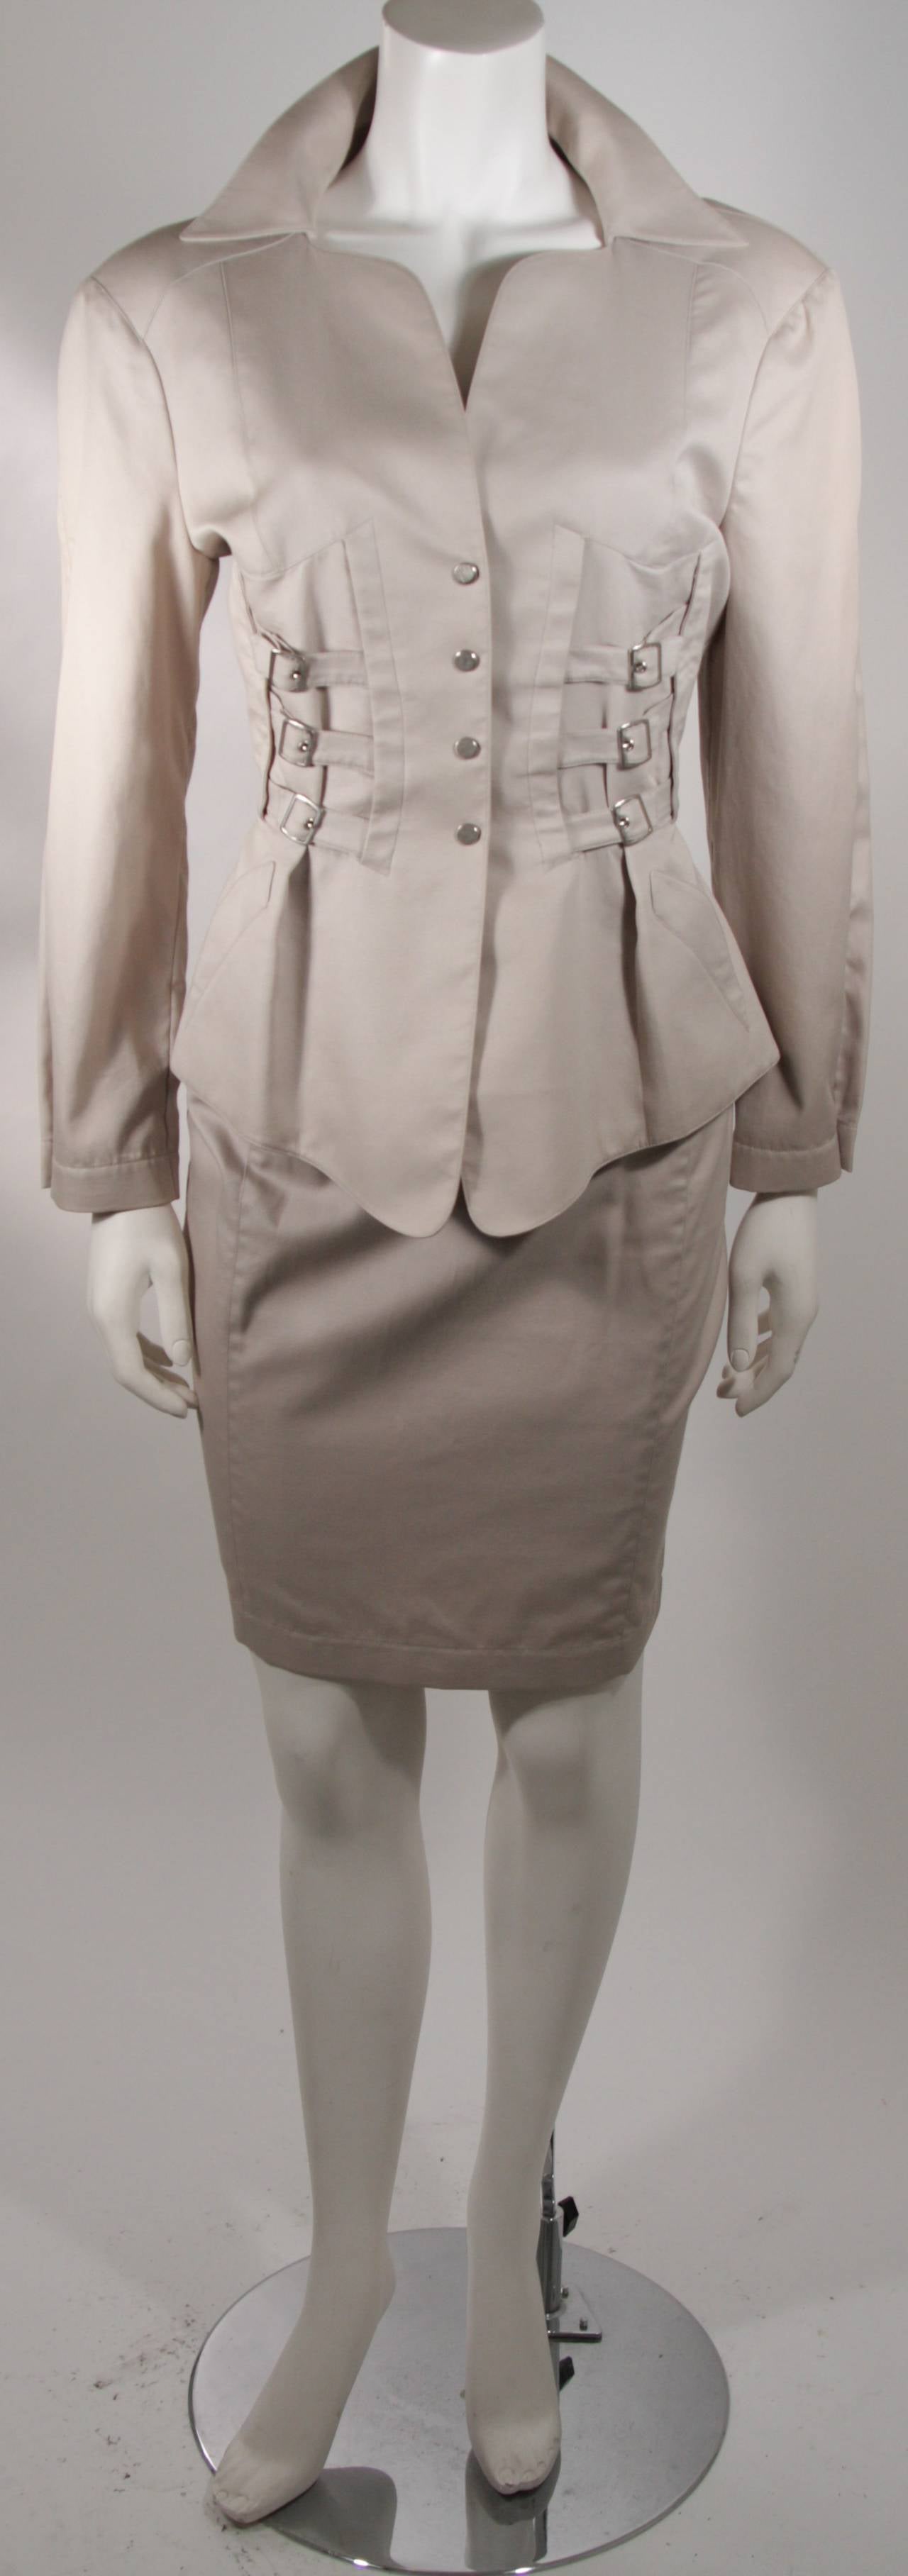 This Thierry Mugler skirt suit ensemble features a classic Thierry Mugler silhouette which embodies strength, power, and femininity. The jacket is accented with silver buckles and a slight peplum flare (Snap closures). The skirt is a classic pencil